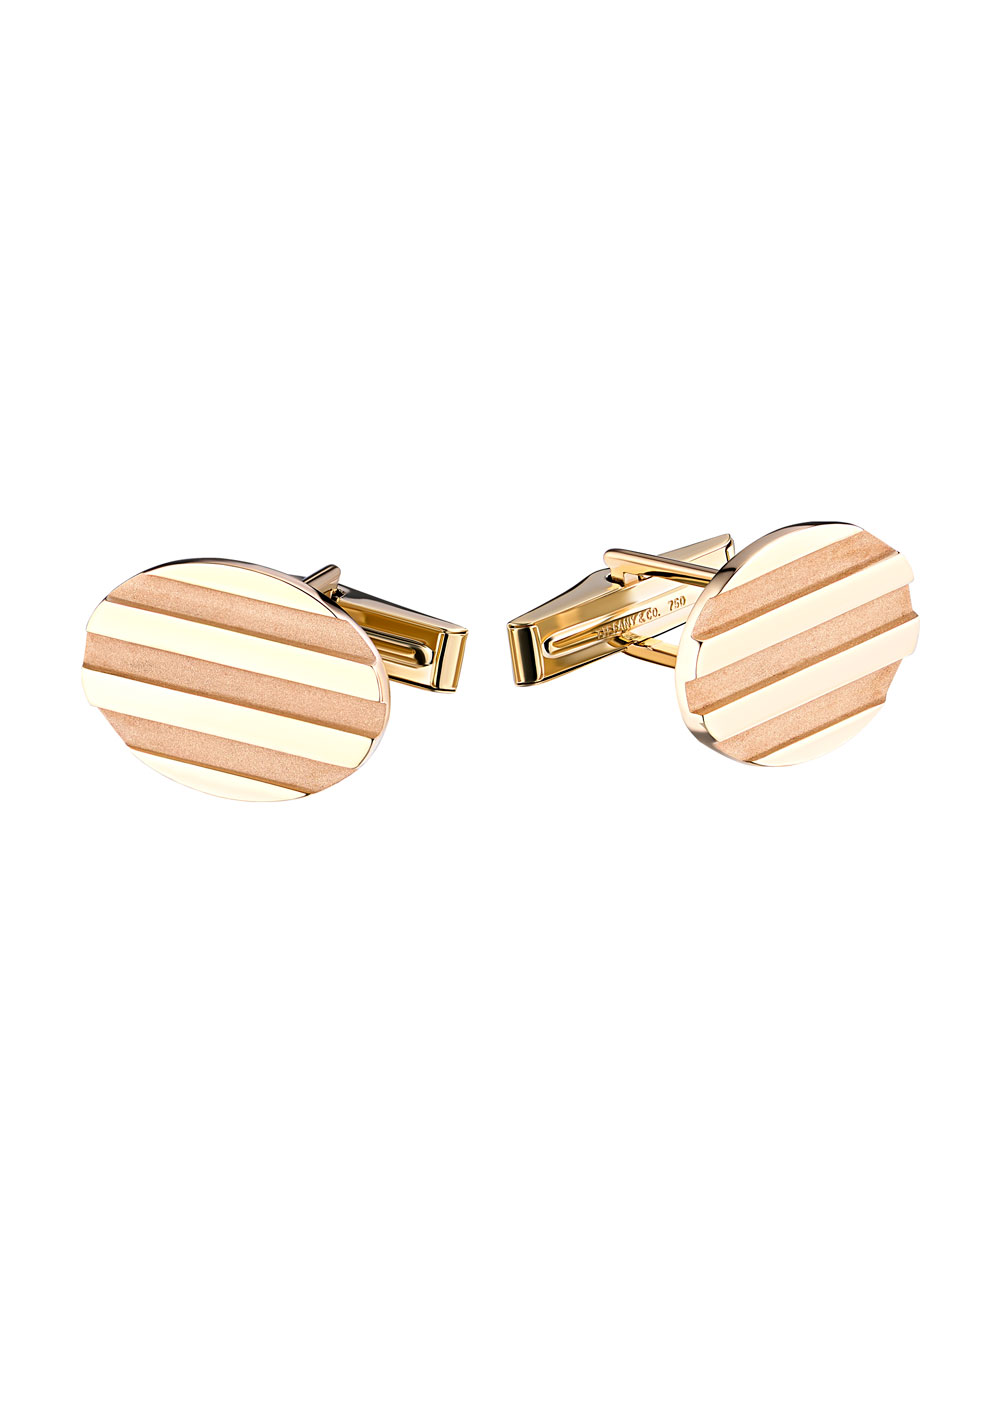 Tiffany & Co Запонки Atlas Grooved Oval Yellow Gold Cufflinks 1995